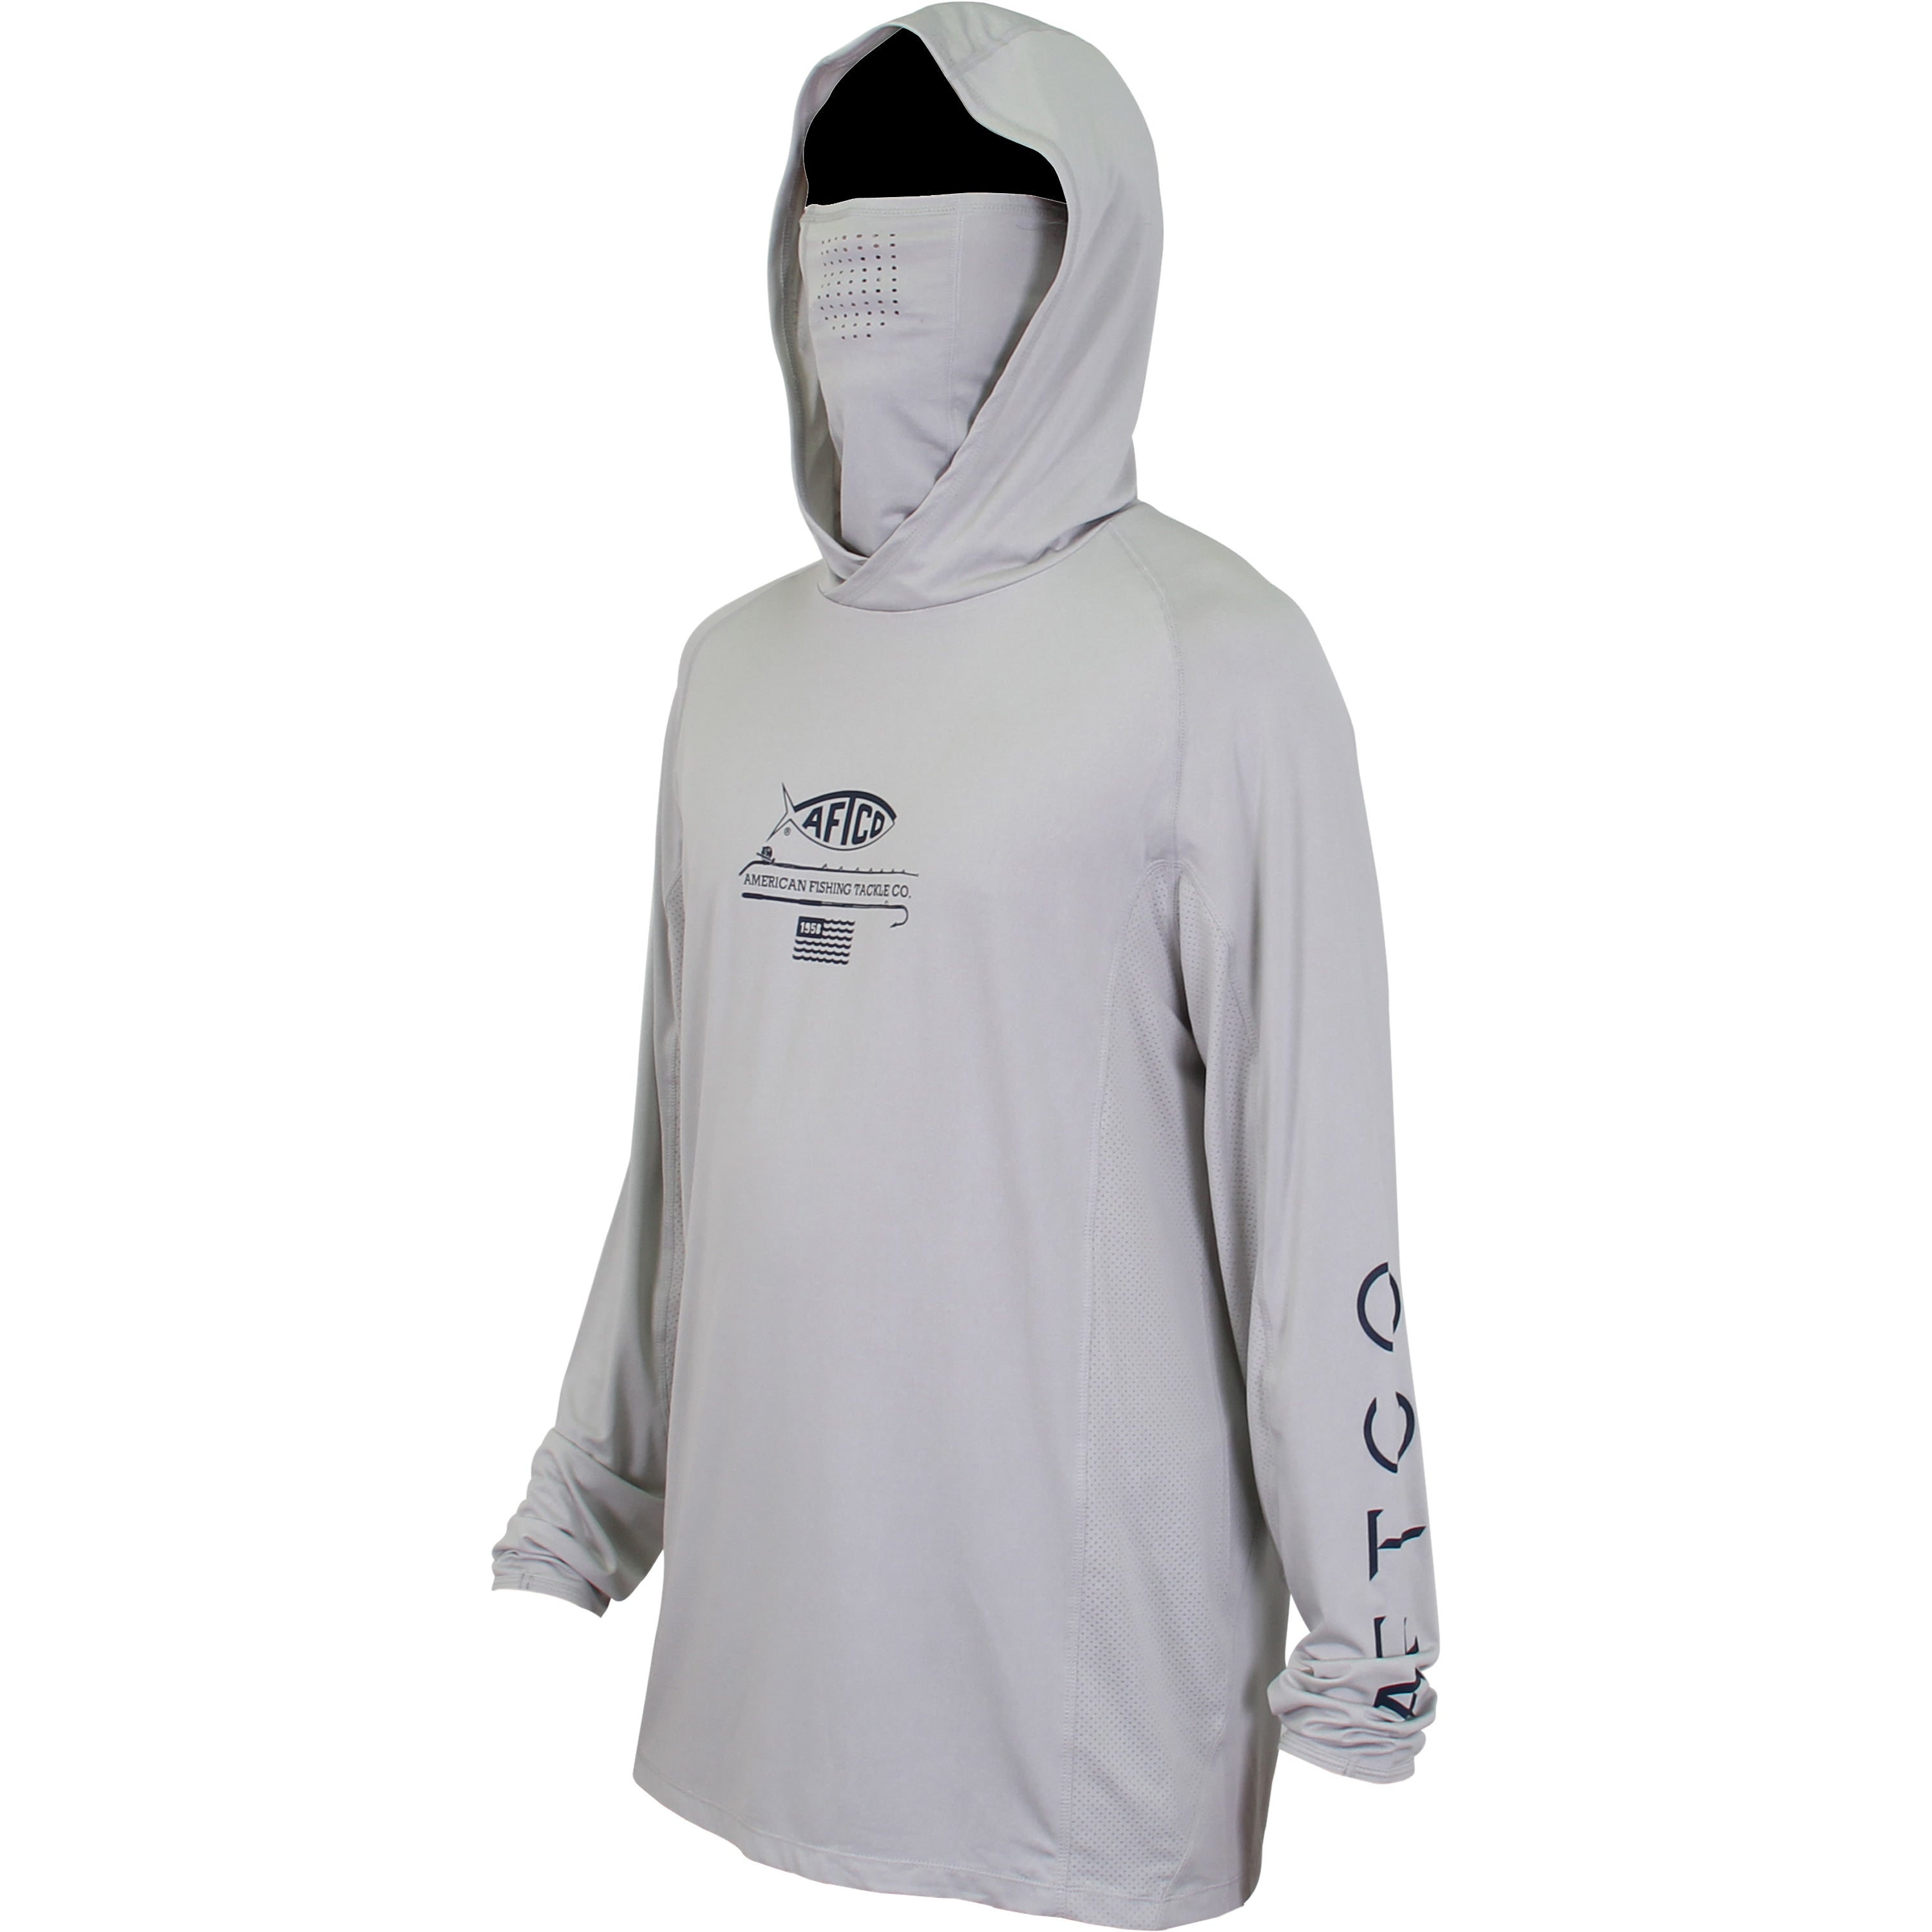 AFTCO Men's Barracuda Geo Cool Hooded LS Performance T-Shirt, Silver Heather / X-Large